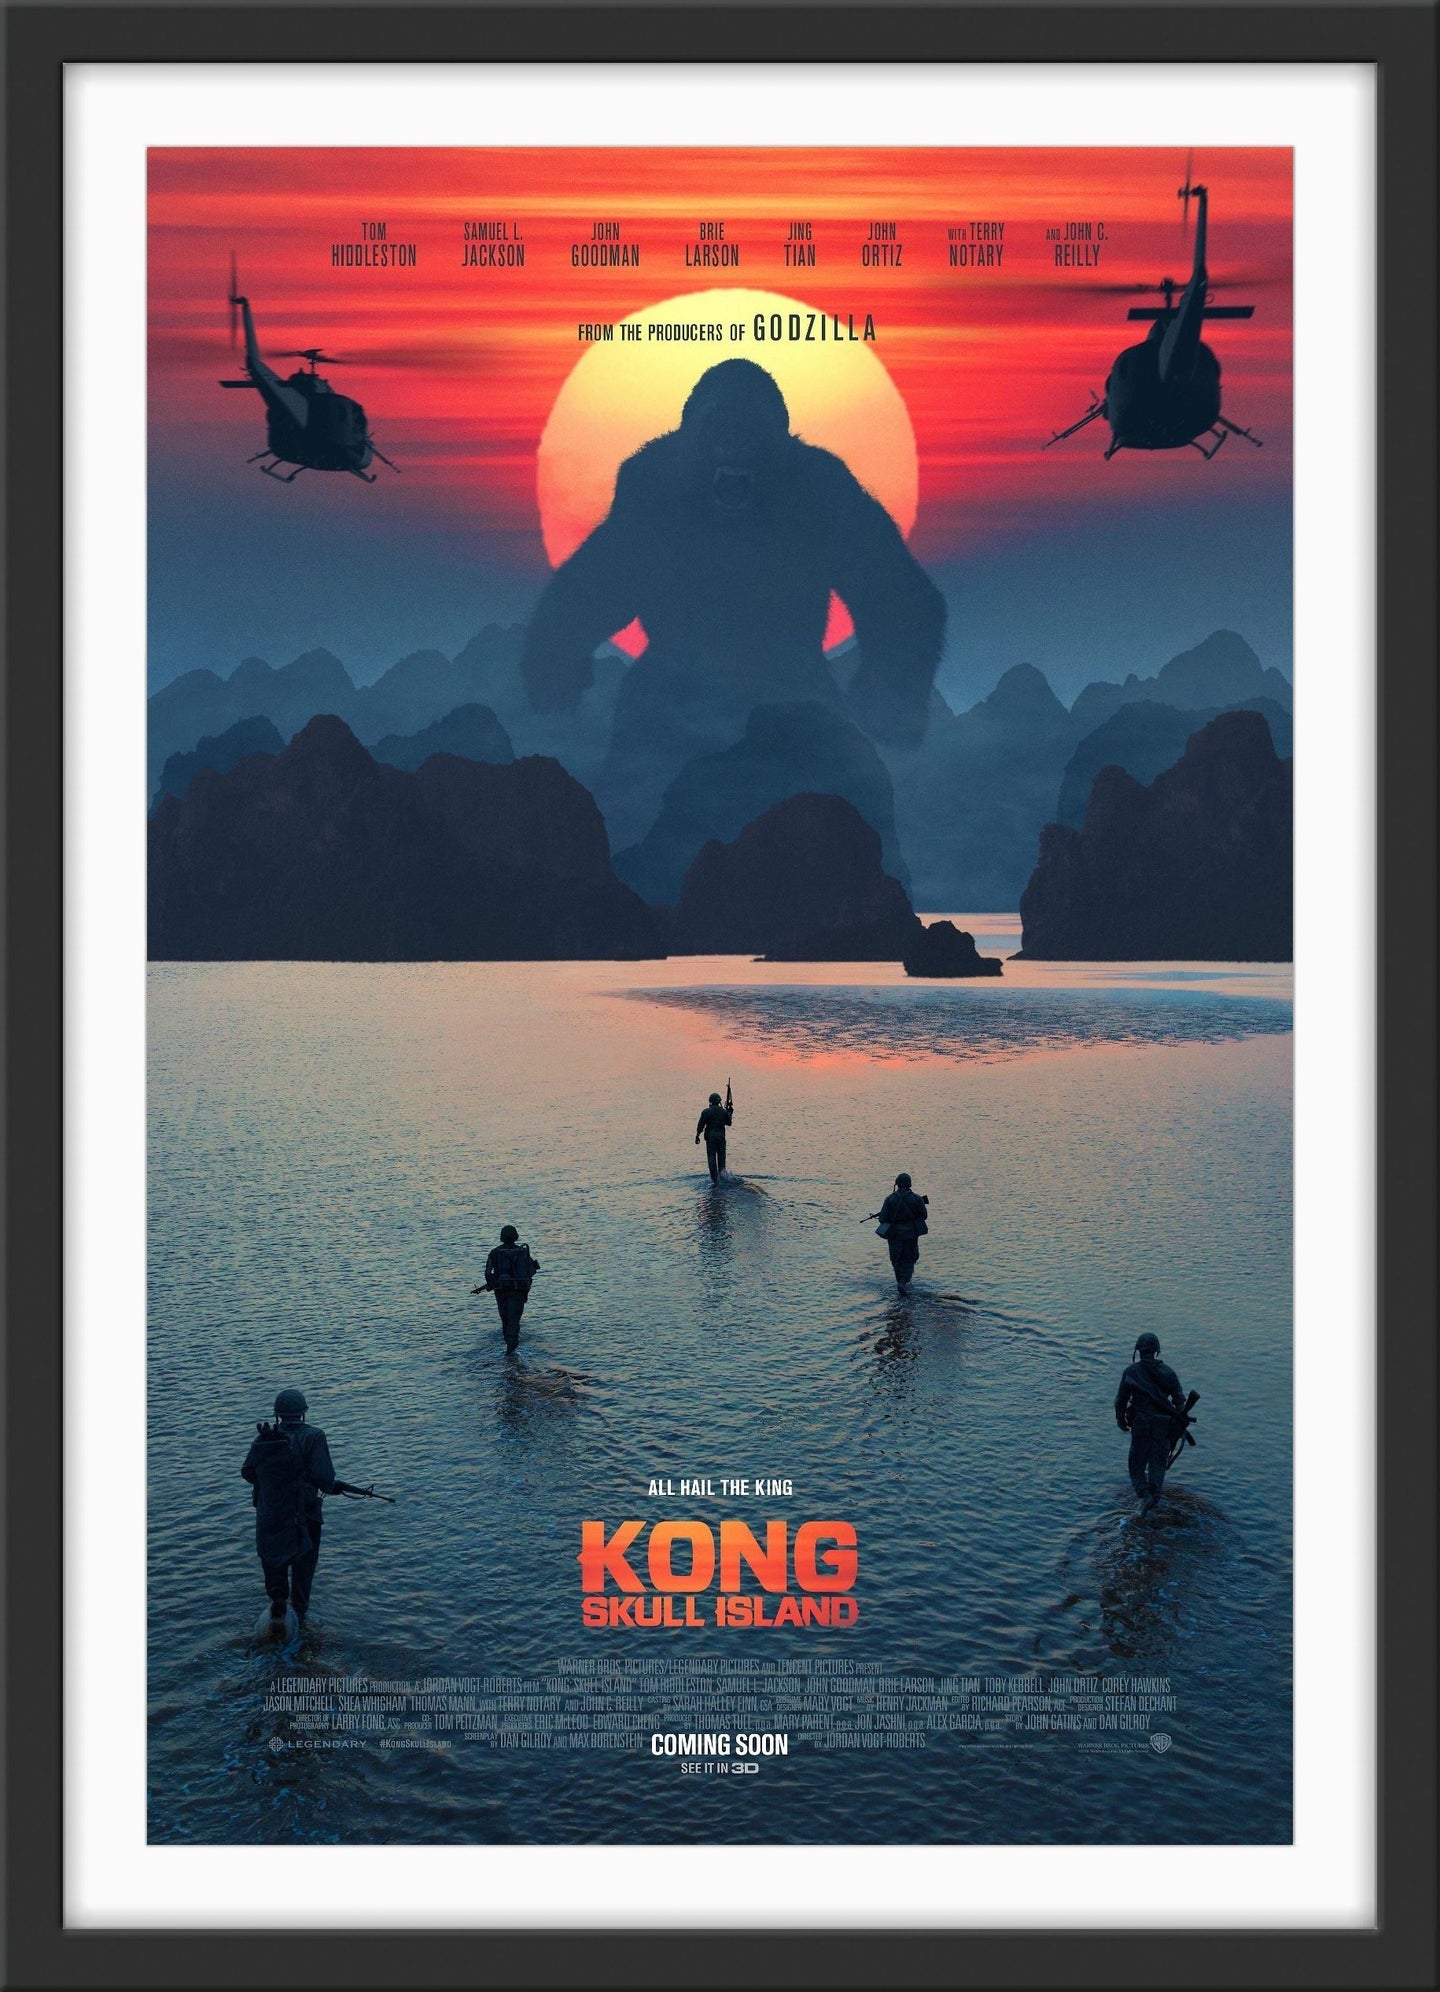 An original movie poster for the film Kong Skull Island